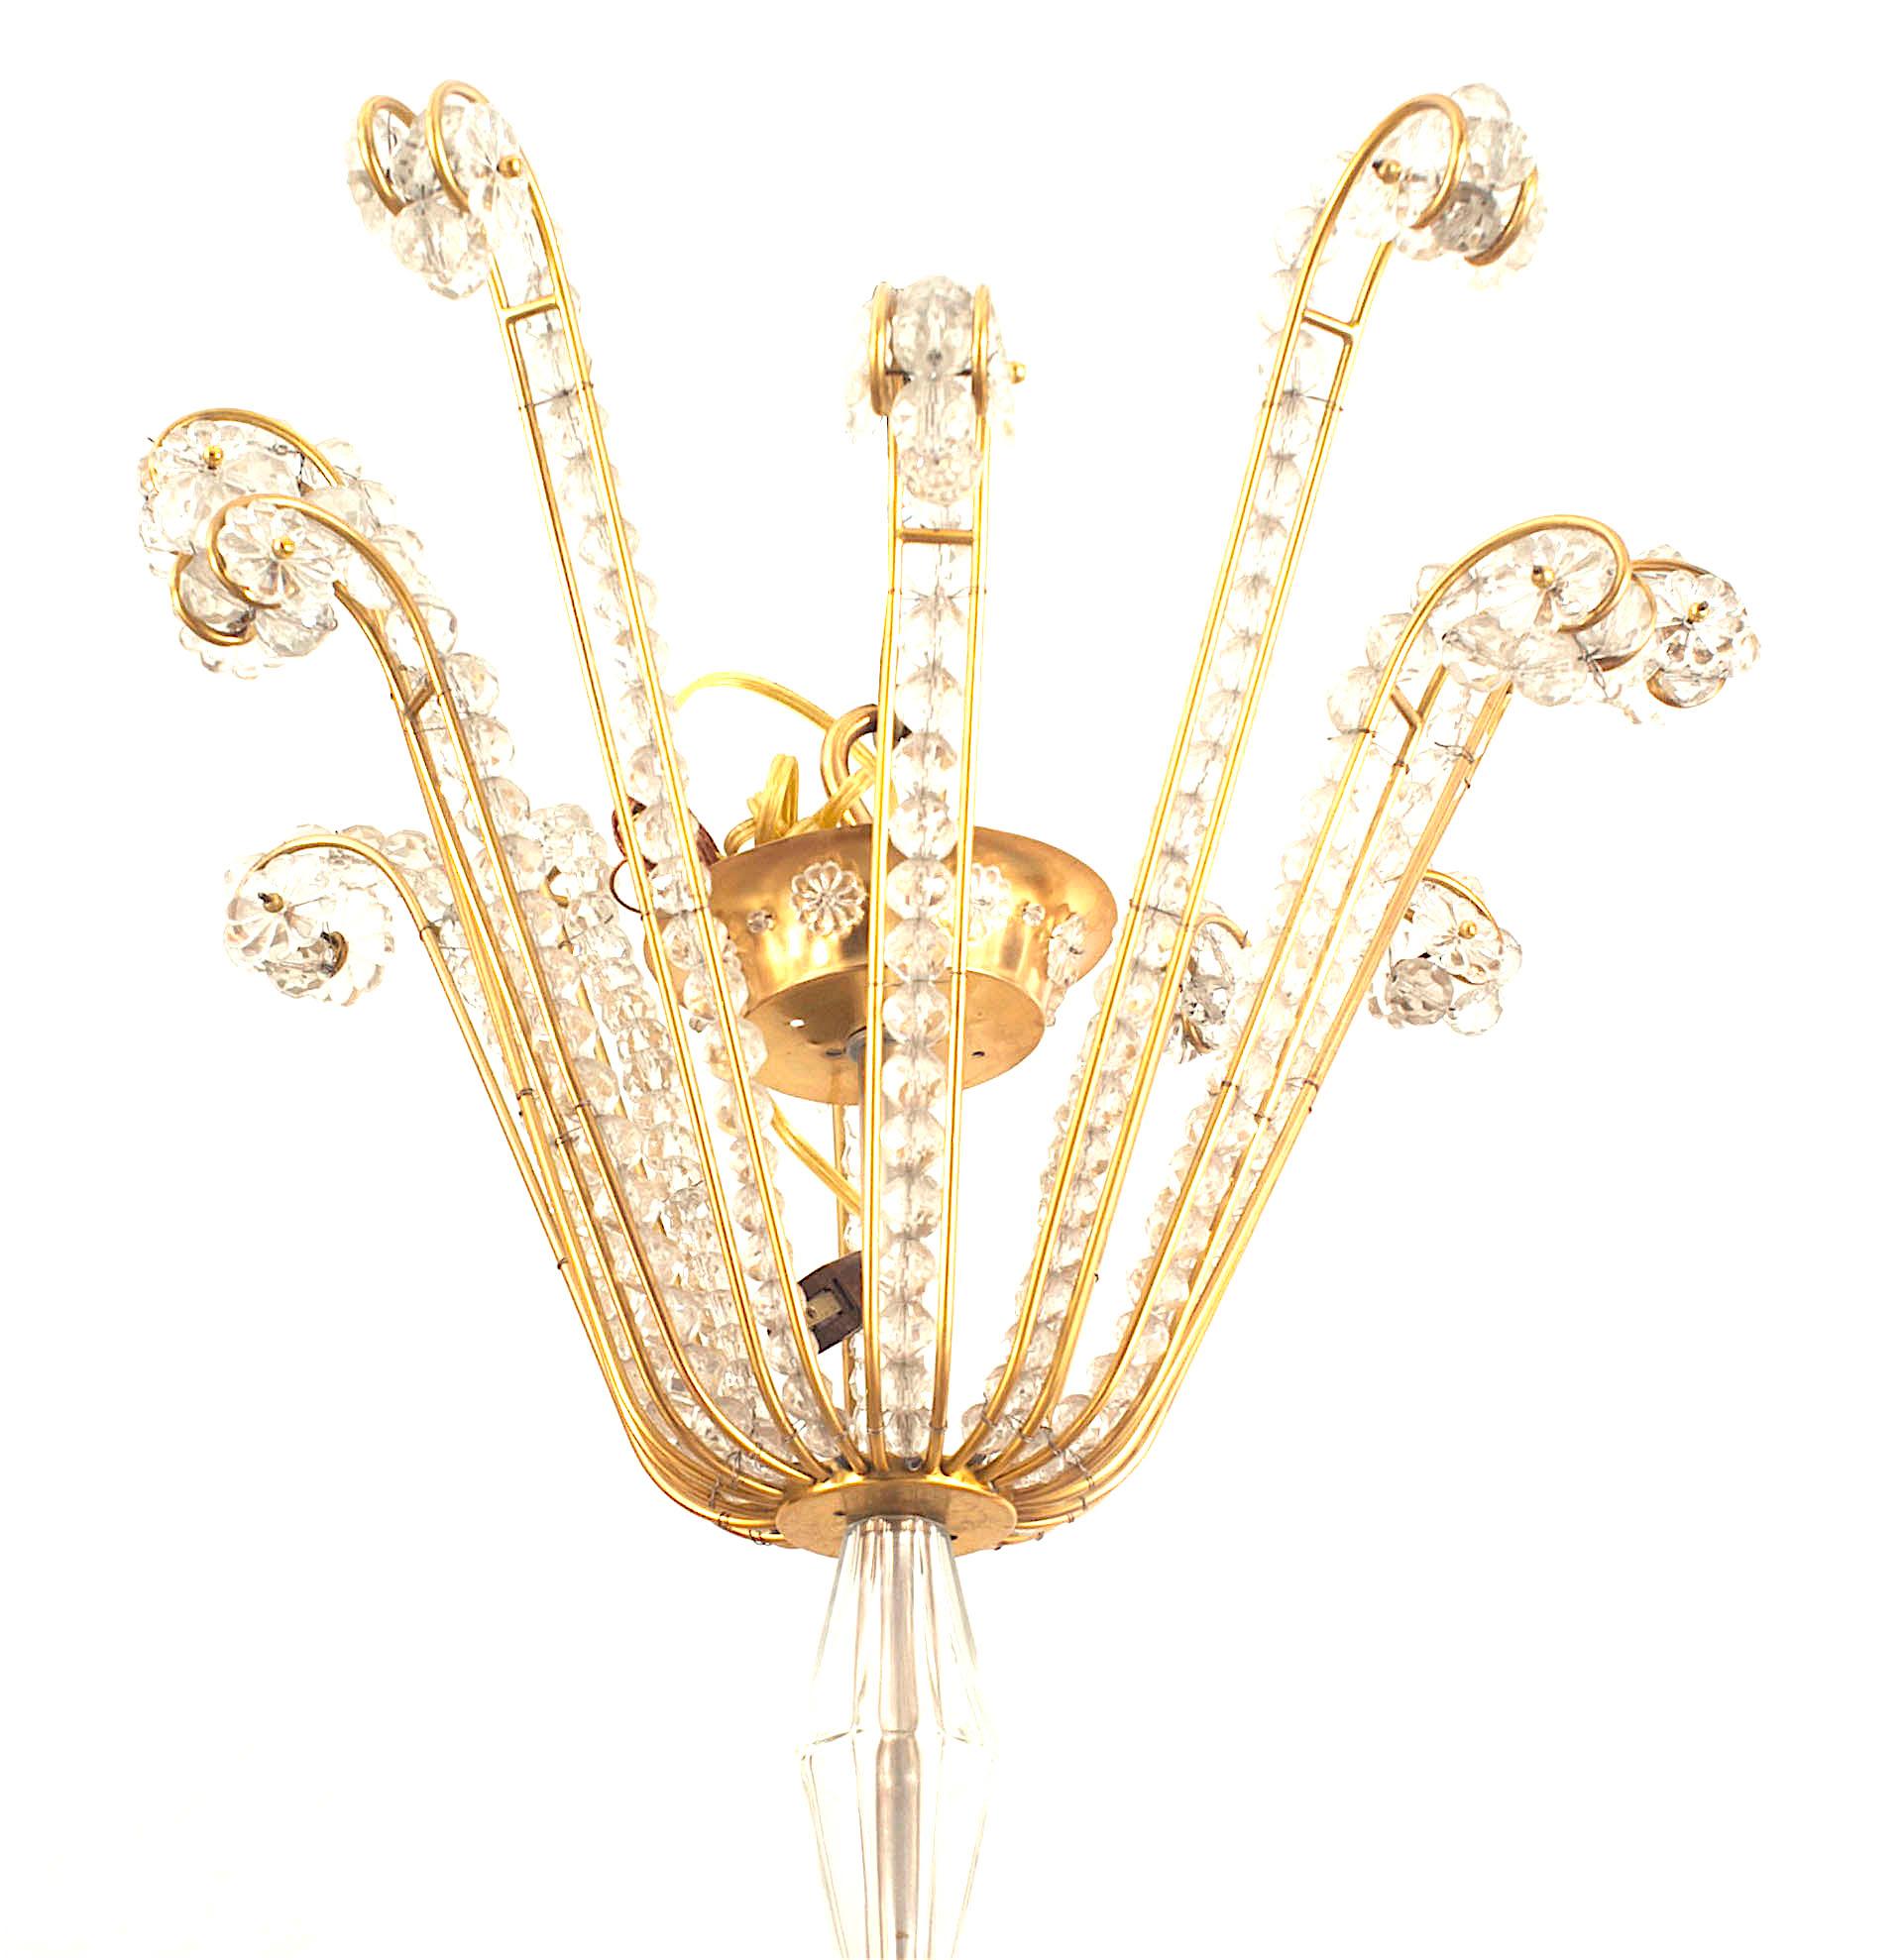 French Mid-Century (1940s) brass frame chandelier with 2 tiers of 6 arms having crystal a channel of crystal beads and rosettes on round bobeches with a crystal ball finial bottom. (BAGUES FOR JANSEN)
